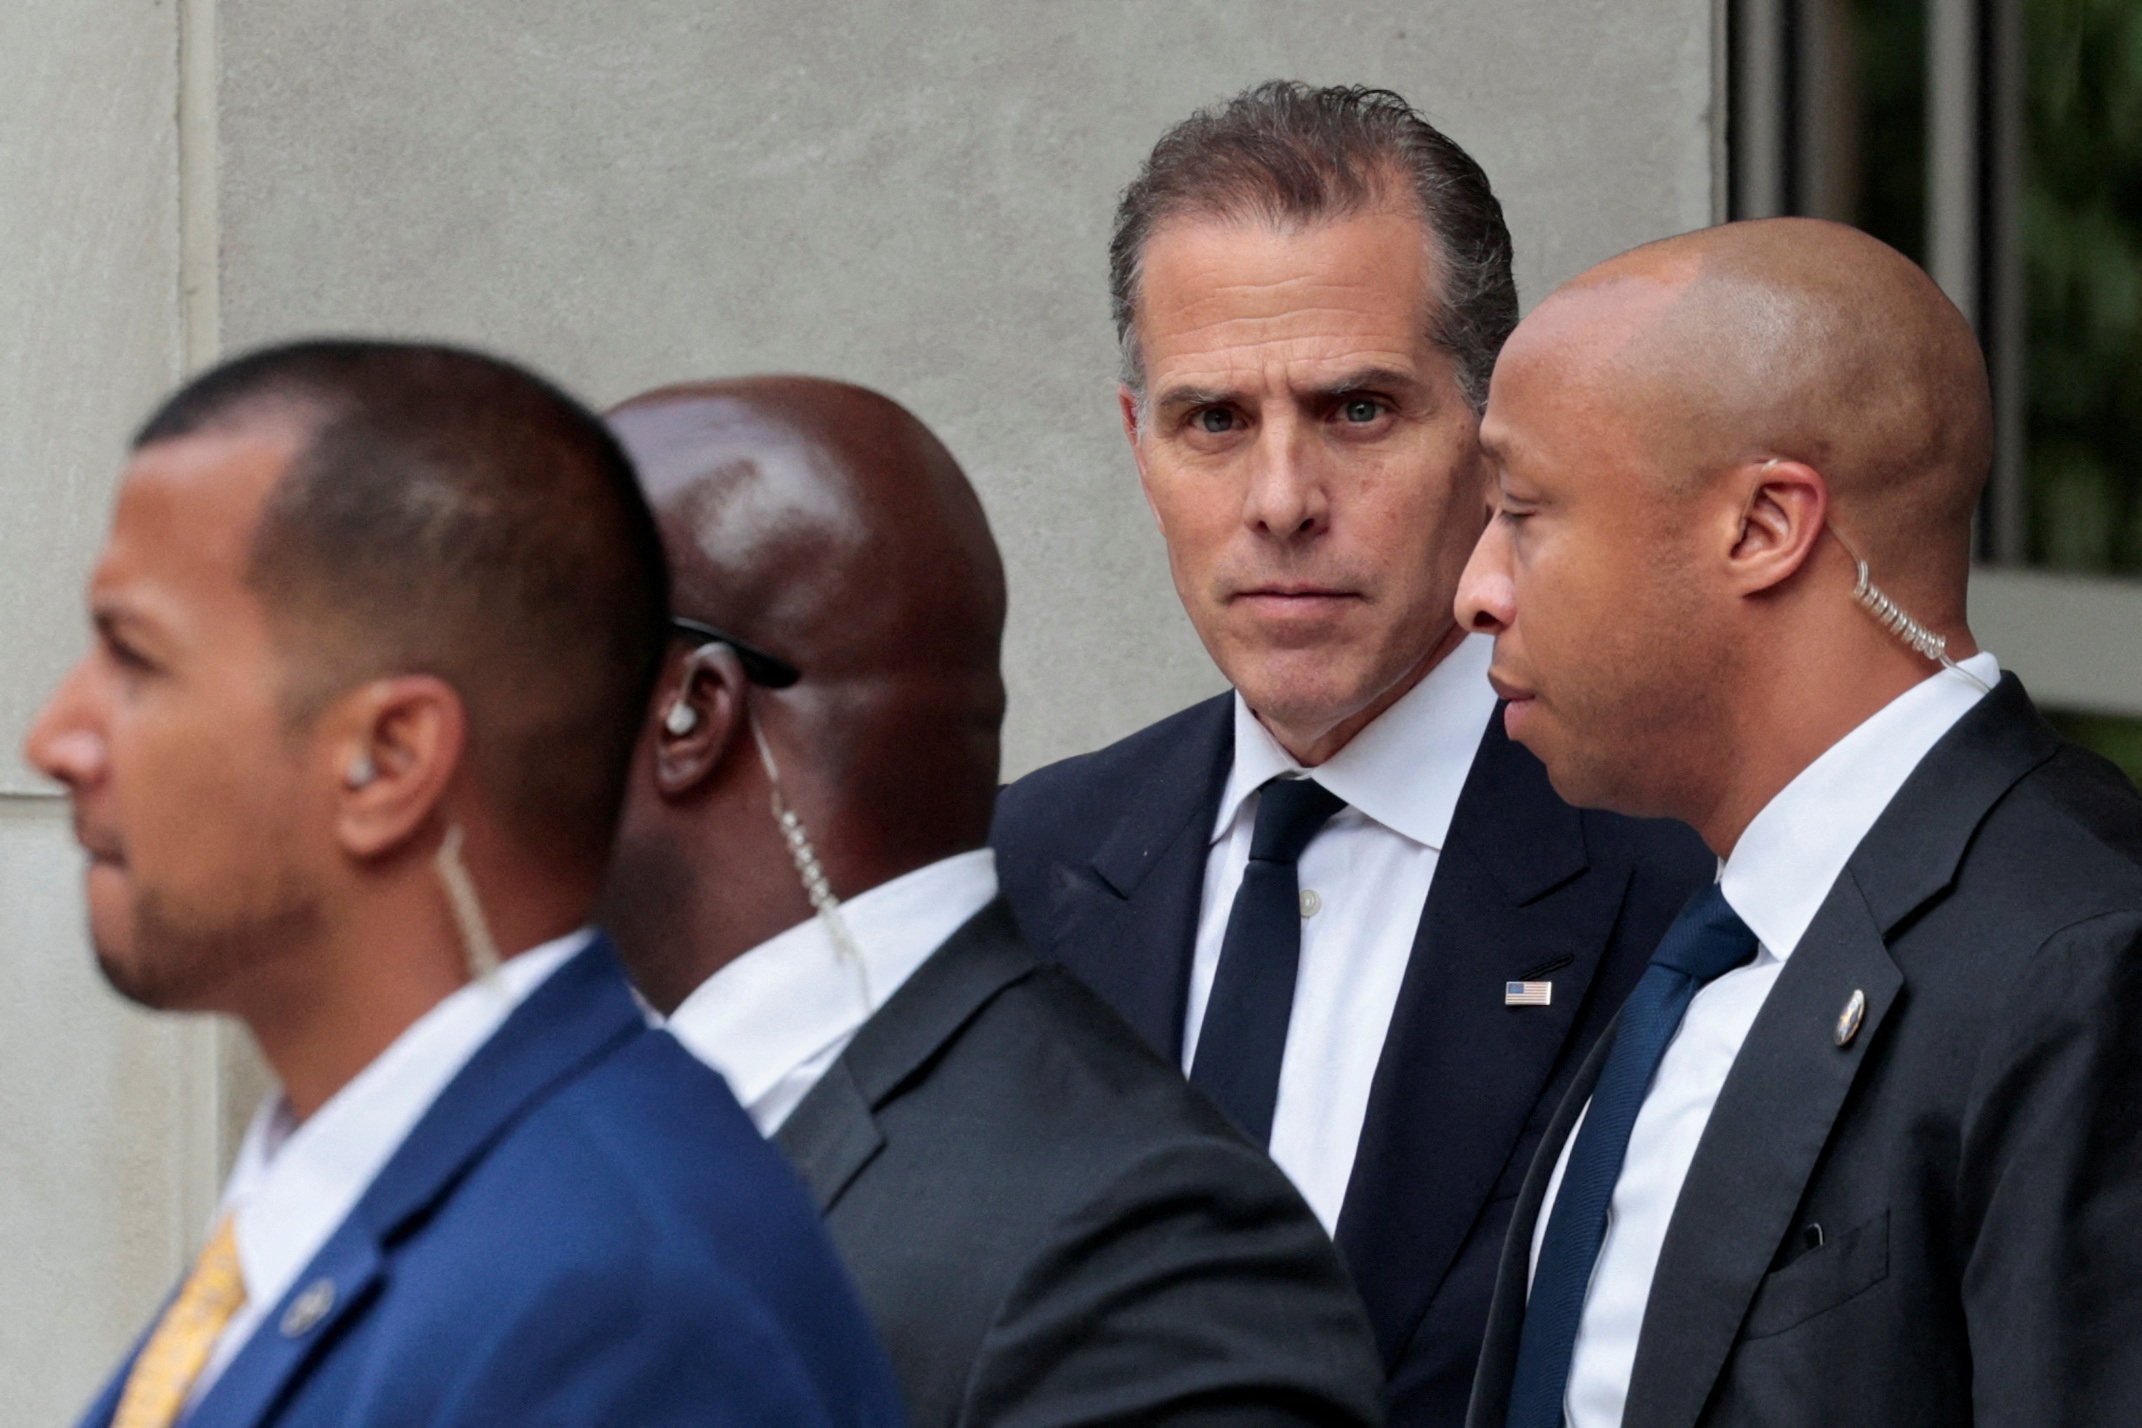 Hunter Biden outside the federal court in Wilmington, Delaware. Photo: Reuters